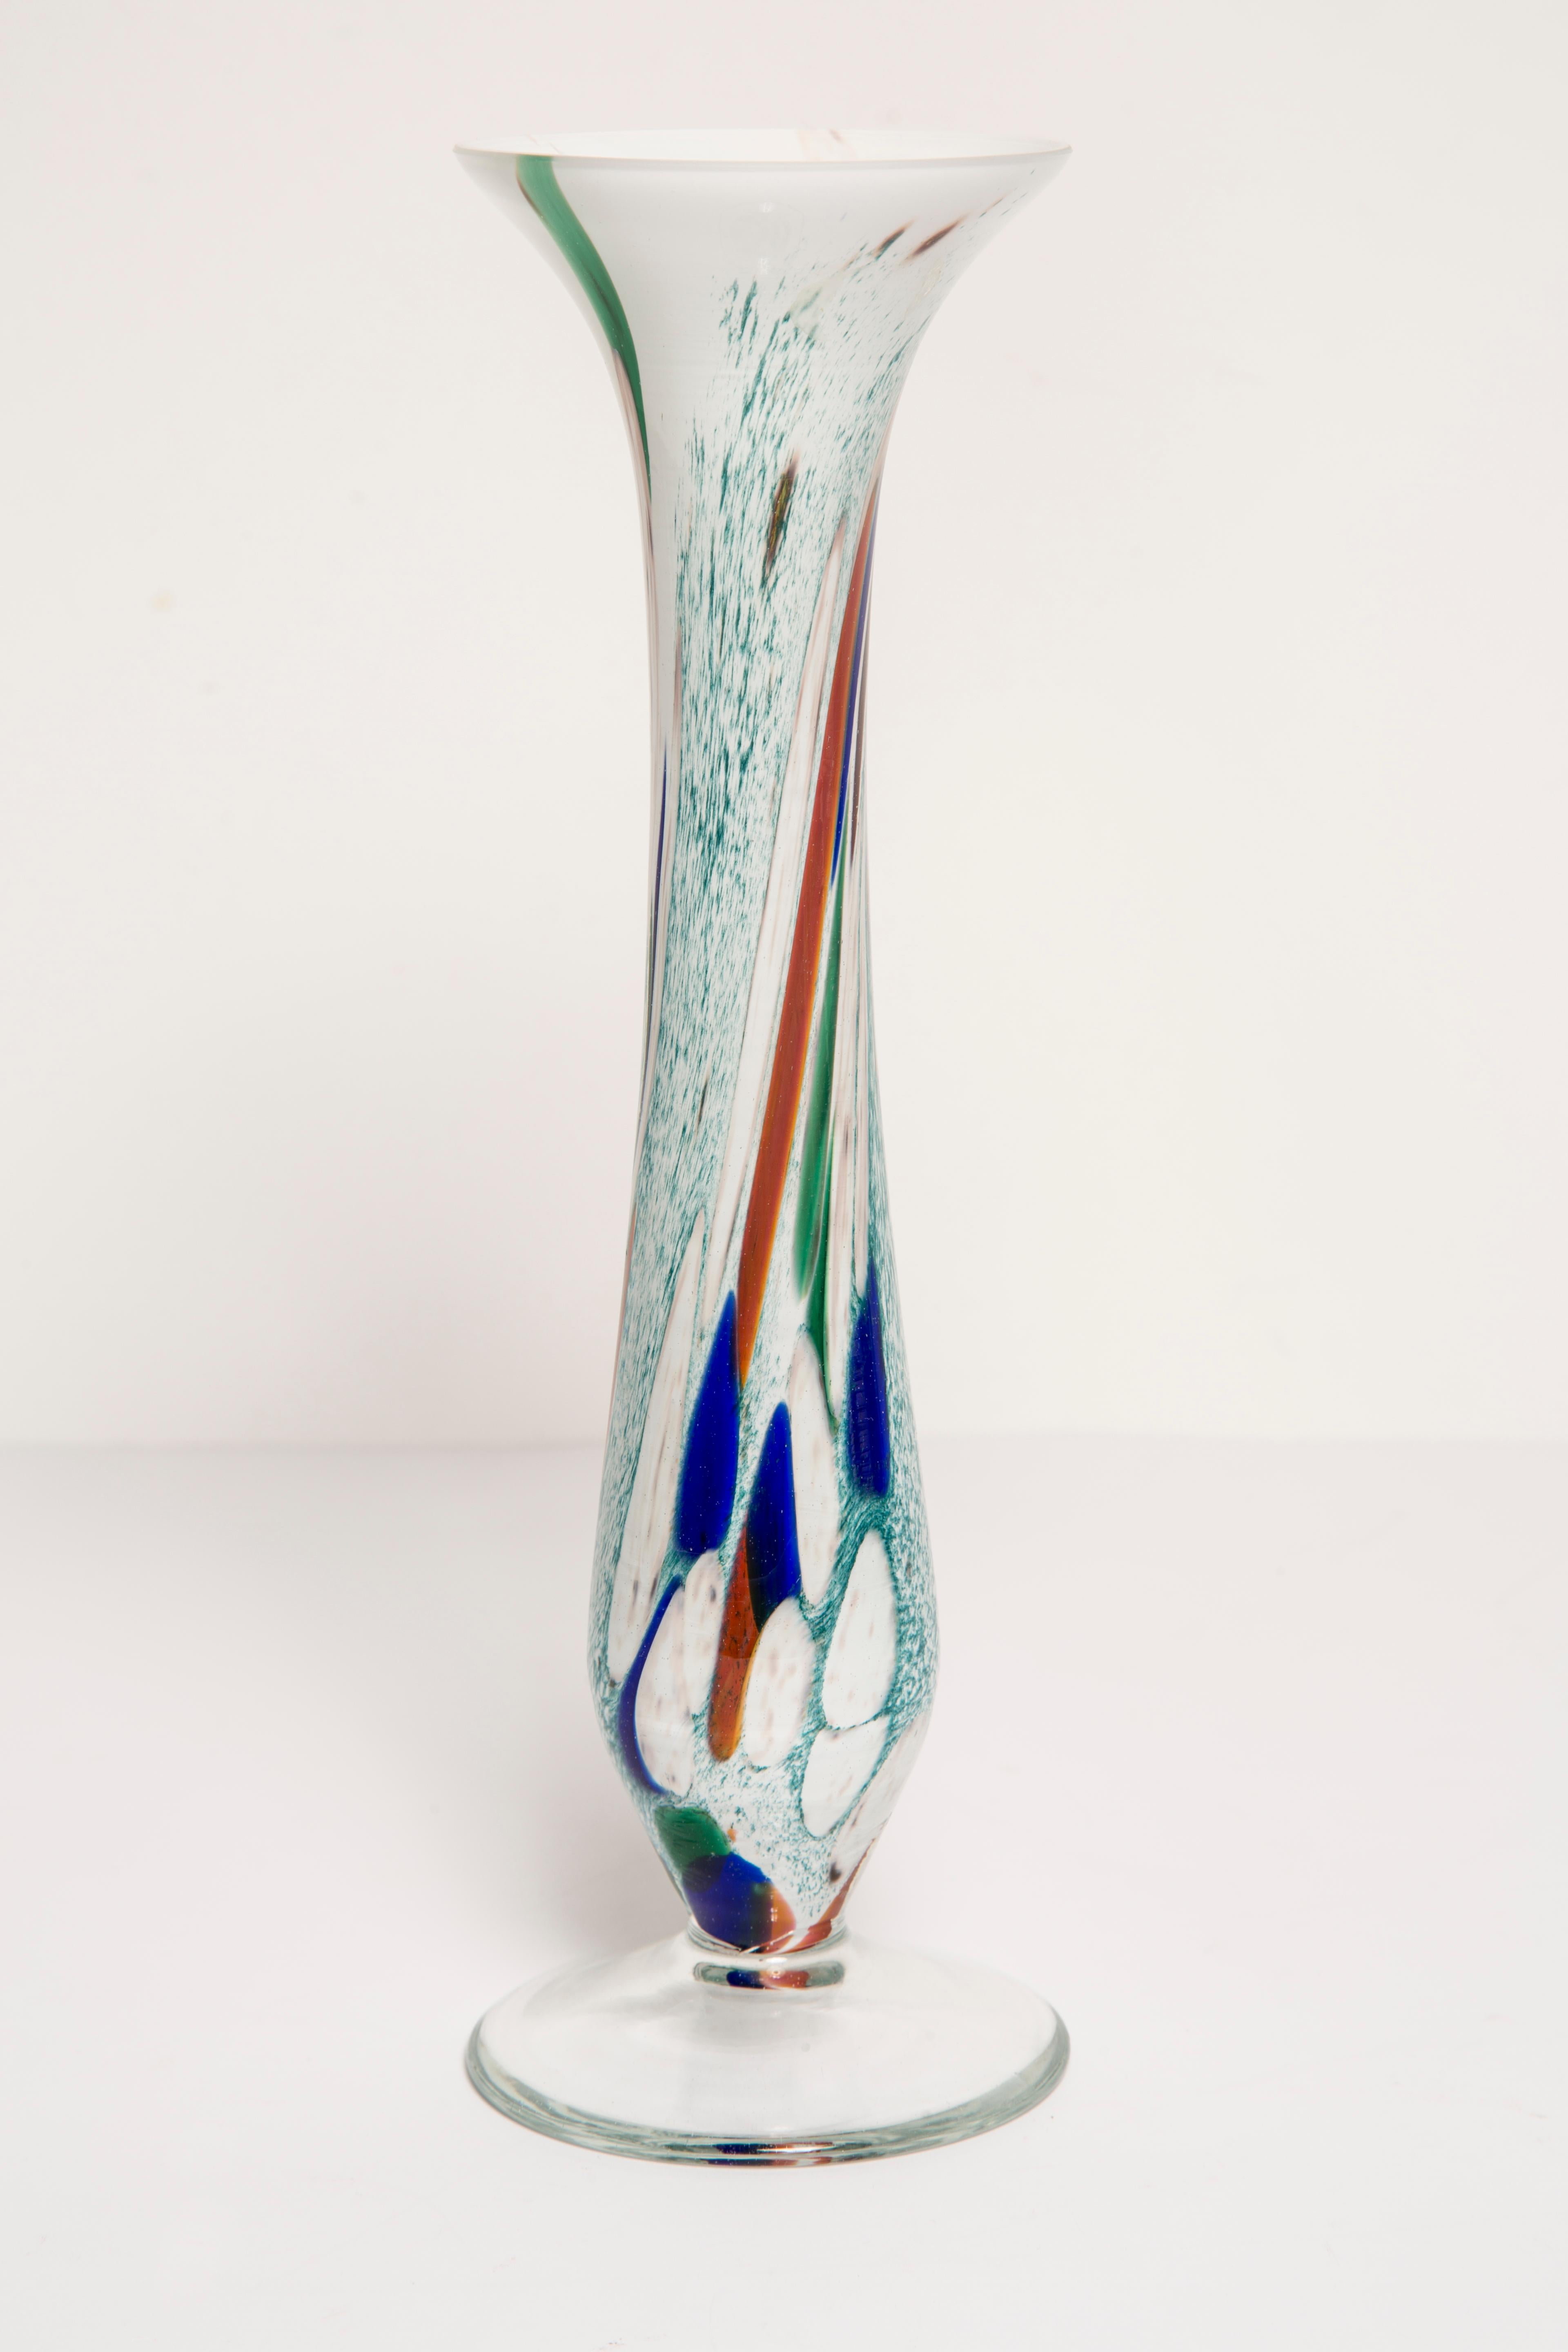 Midcentury Vintage White and Blue Slim Murano Vase, Italy, 1960s For Sale 1